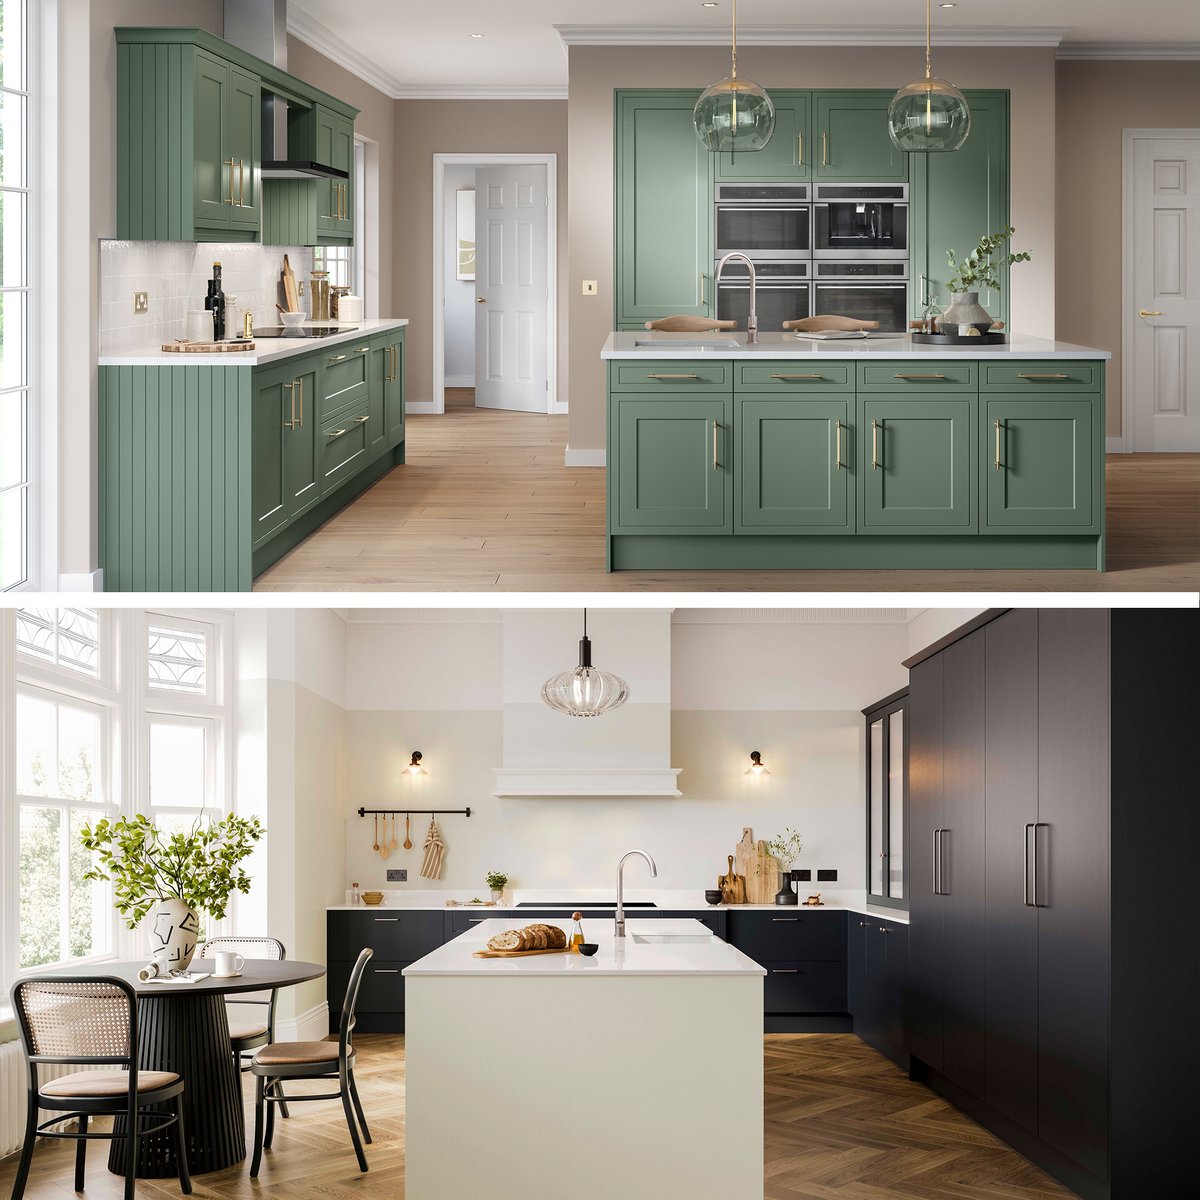 Unleash your inner artist in the heart of your home! @Caple is all about turning your kitchen into a unique masterpiece. From the timeless charm of the Pensford kitchen to the minimalist Langley Slab range, there is something for everyone. #ad